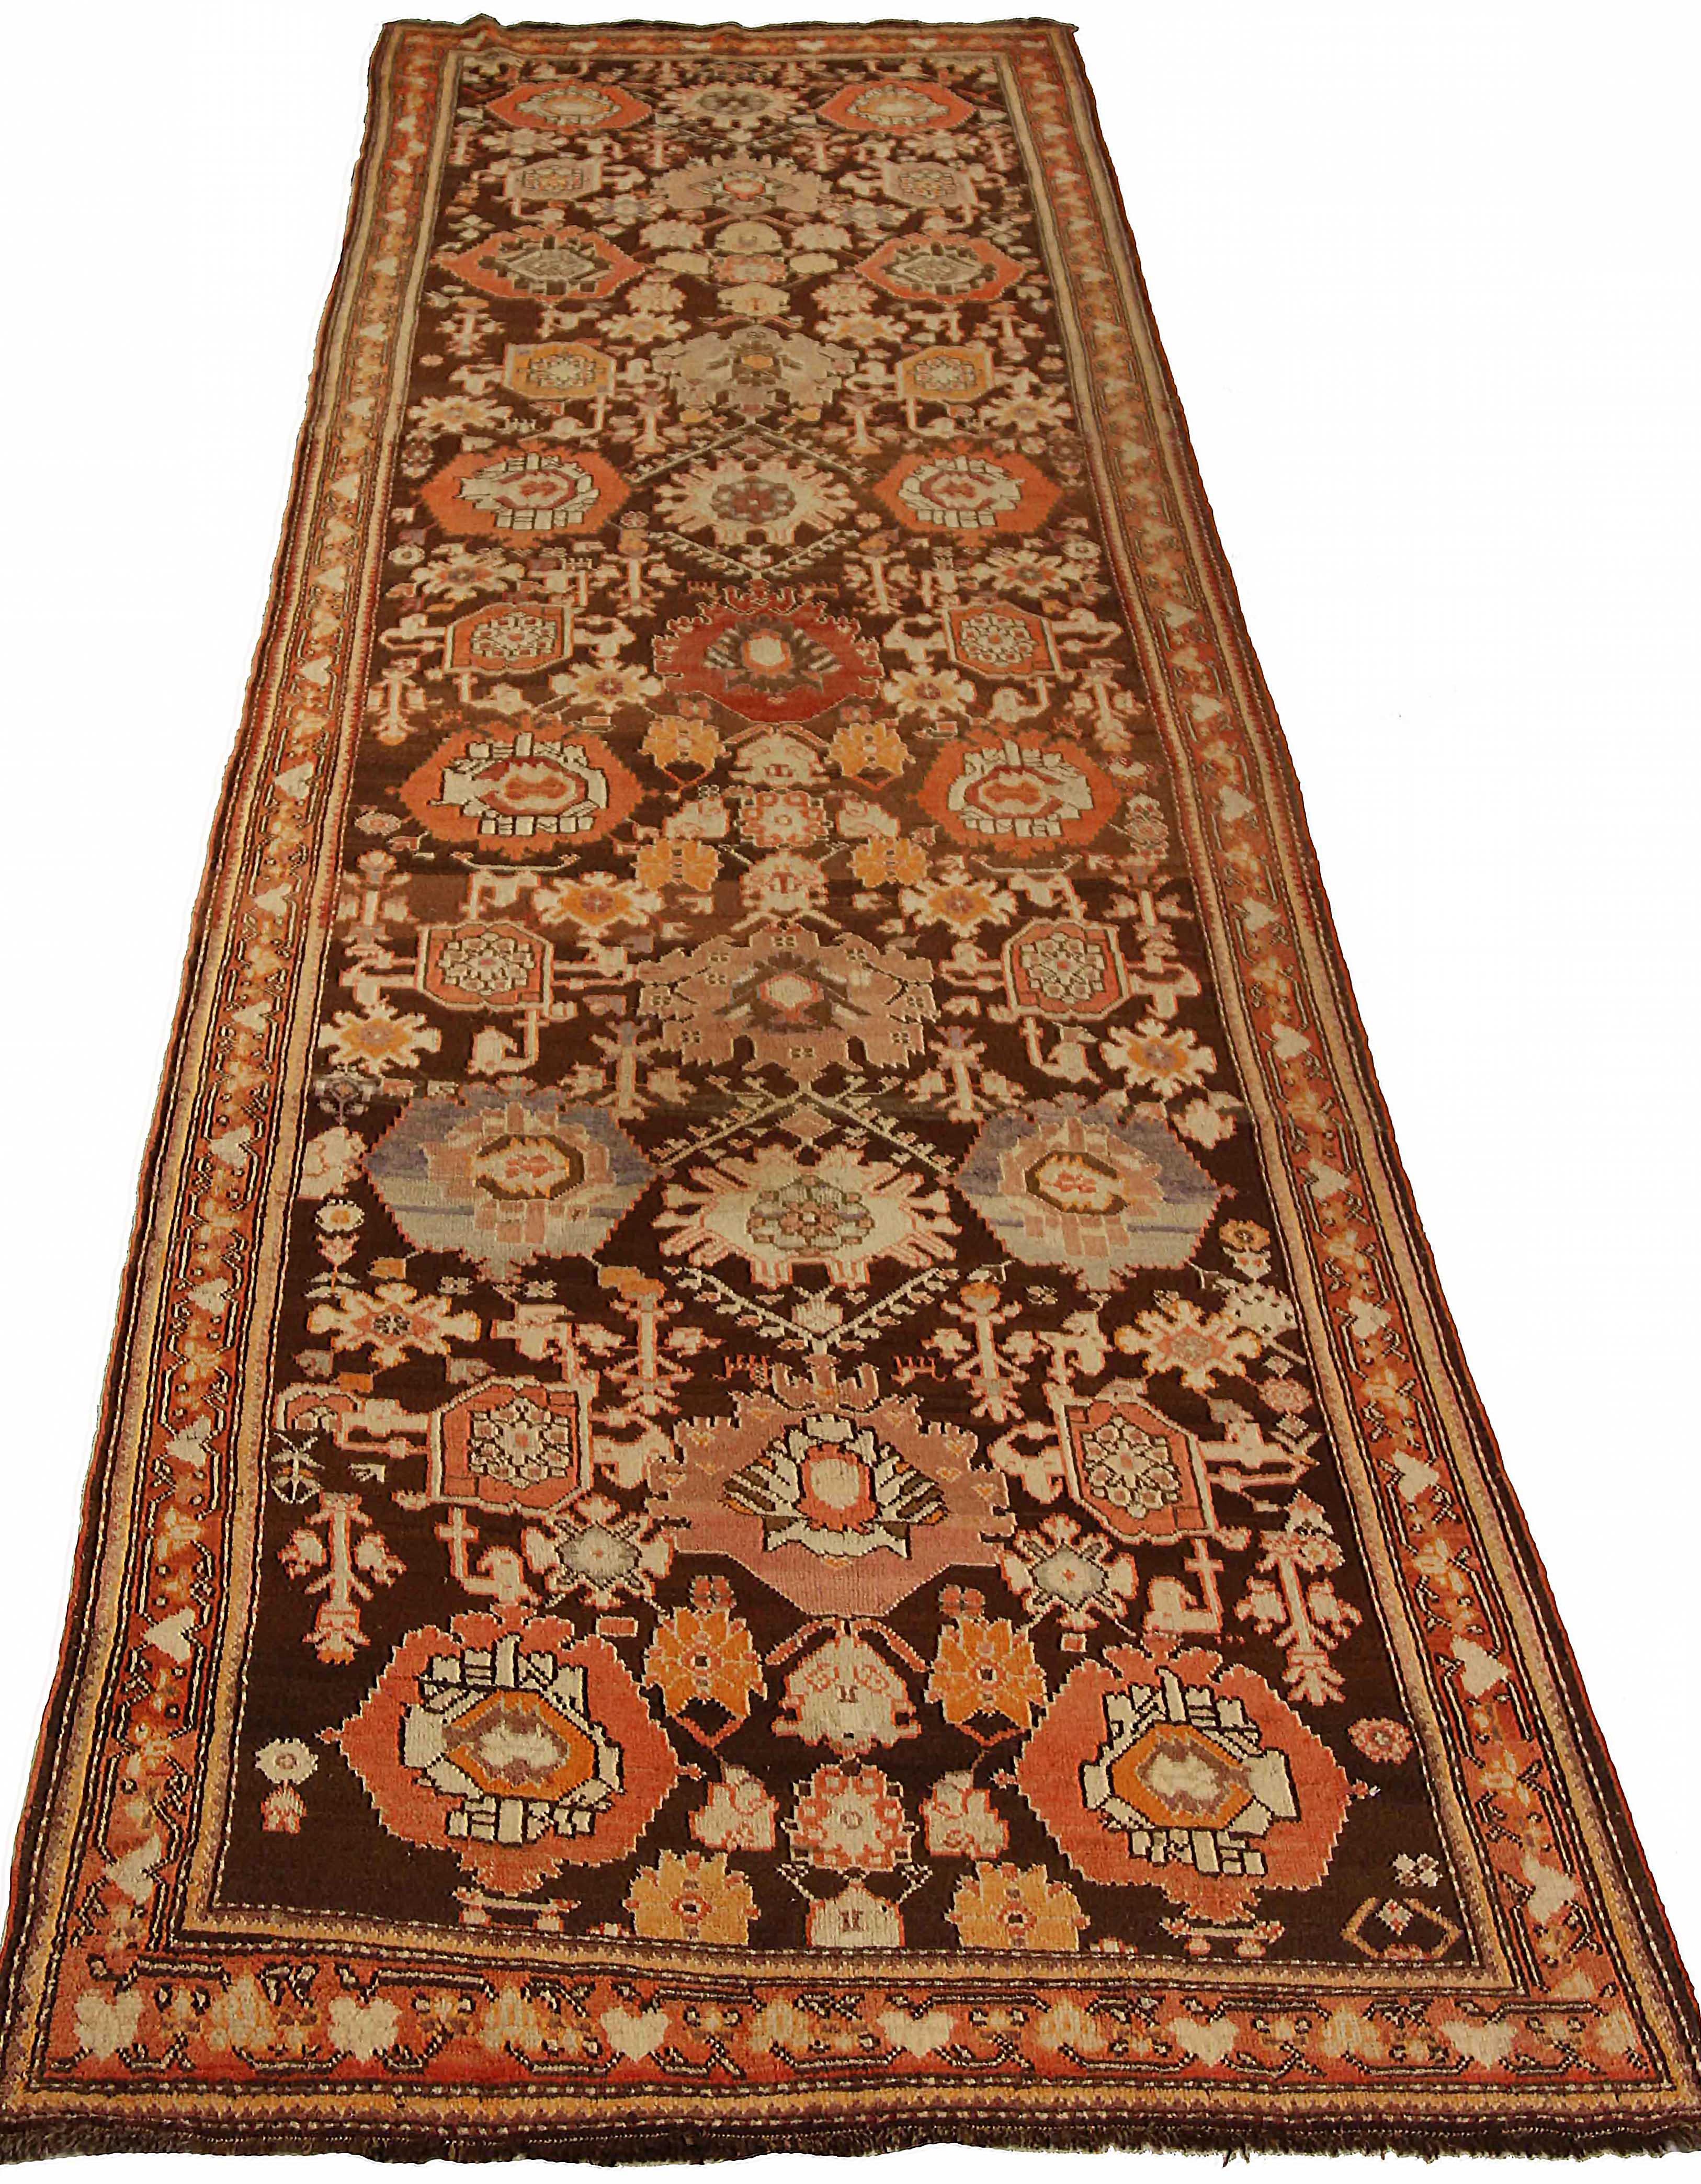 Antique Russian runner rug handwoven from the finest sheep’s wool. It’s colored with all-natural vegetable dyes that are safe for humans and pets. It’s a traditional Karebagh design handwoven by expert artisans. It’s a lovely area runner that can be